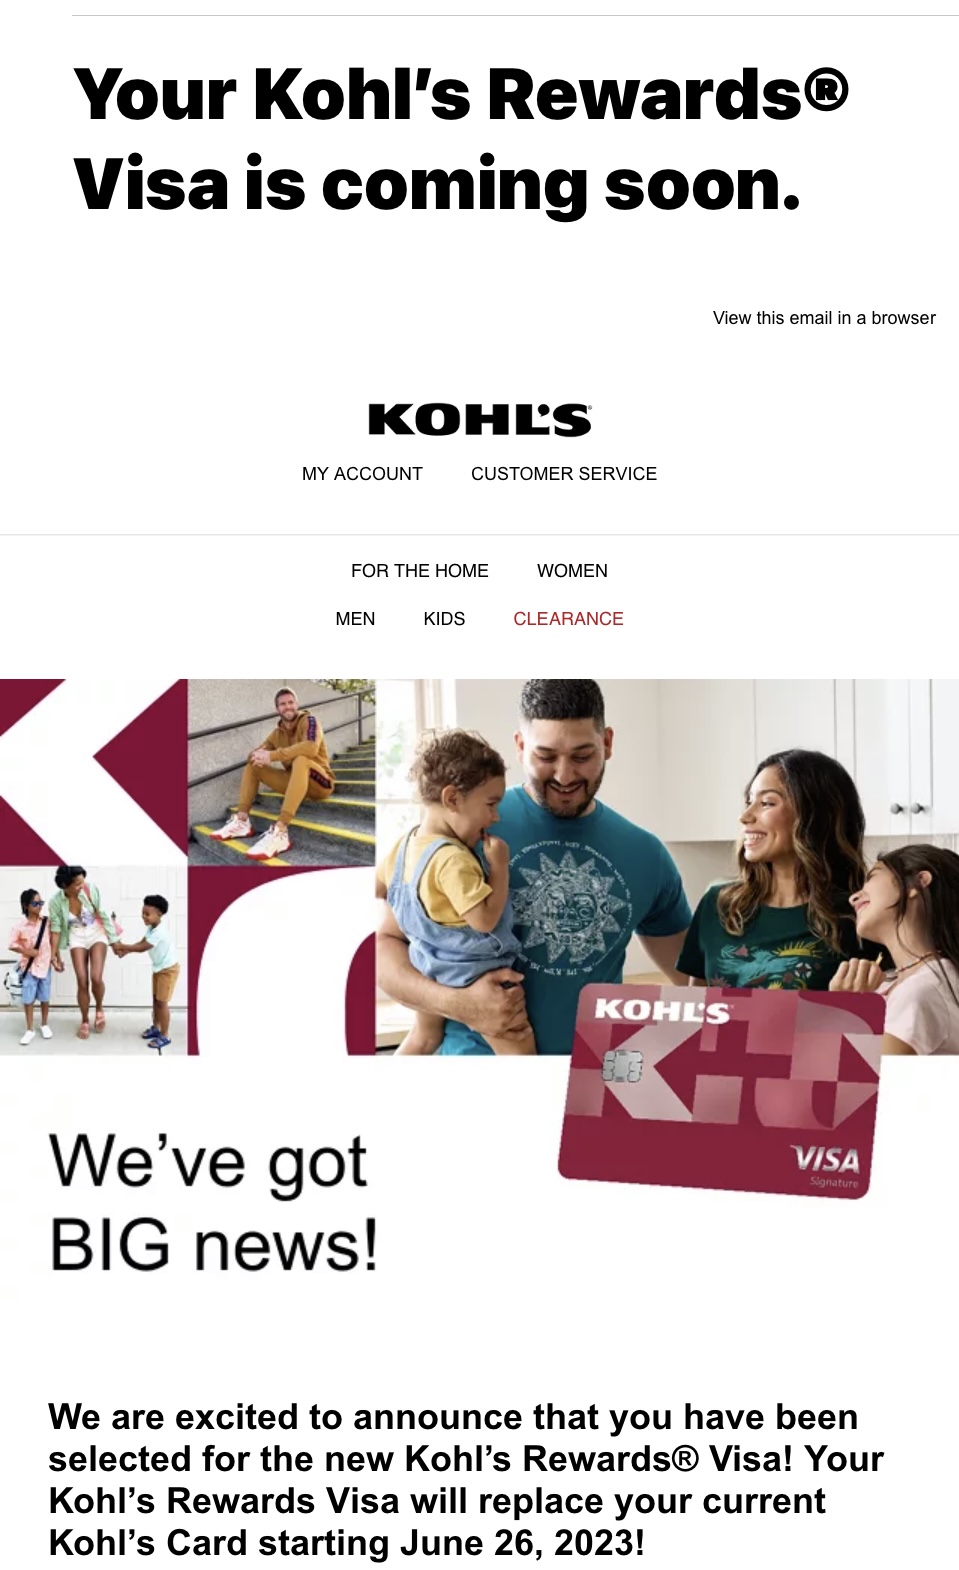 Making Payments on My Kohl's Card